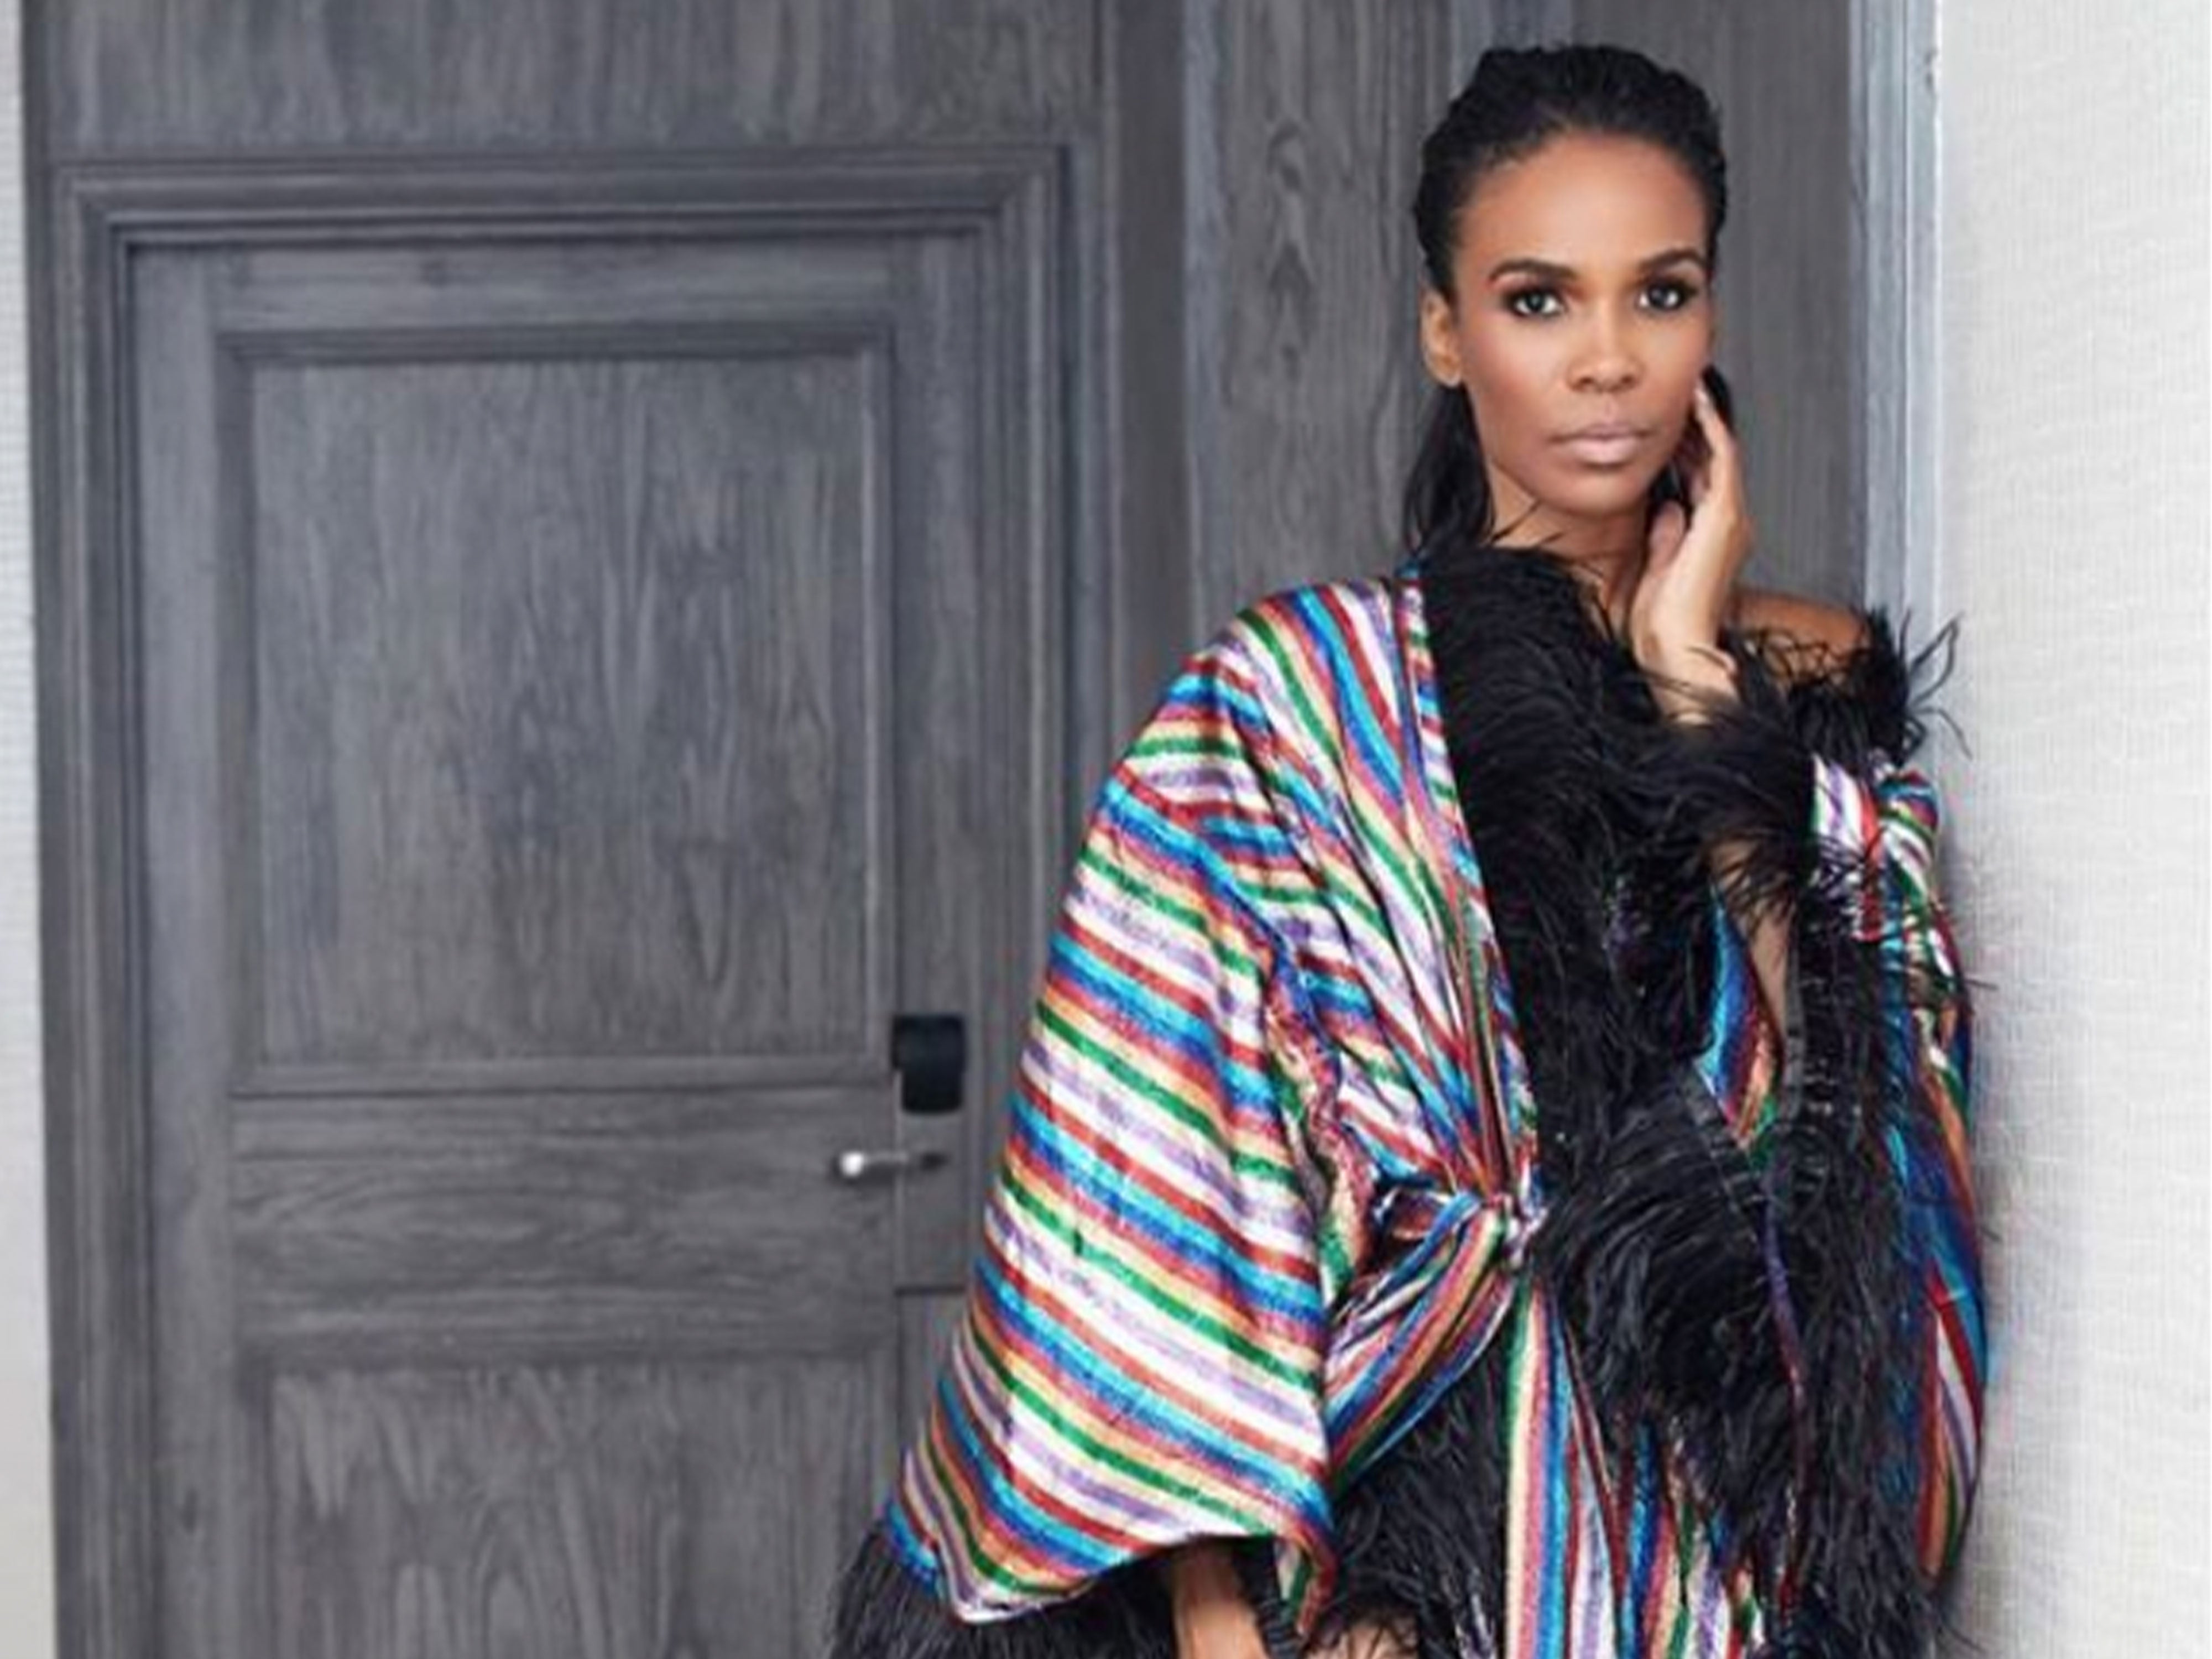 Michelle Williams Is A Vision In This Killer Kimono And Now We Want One, Too